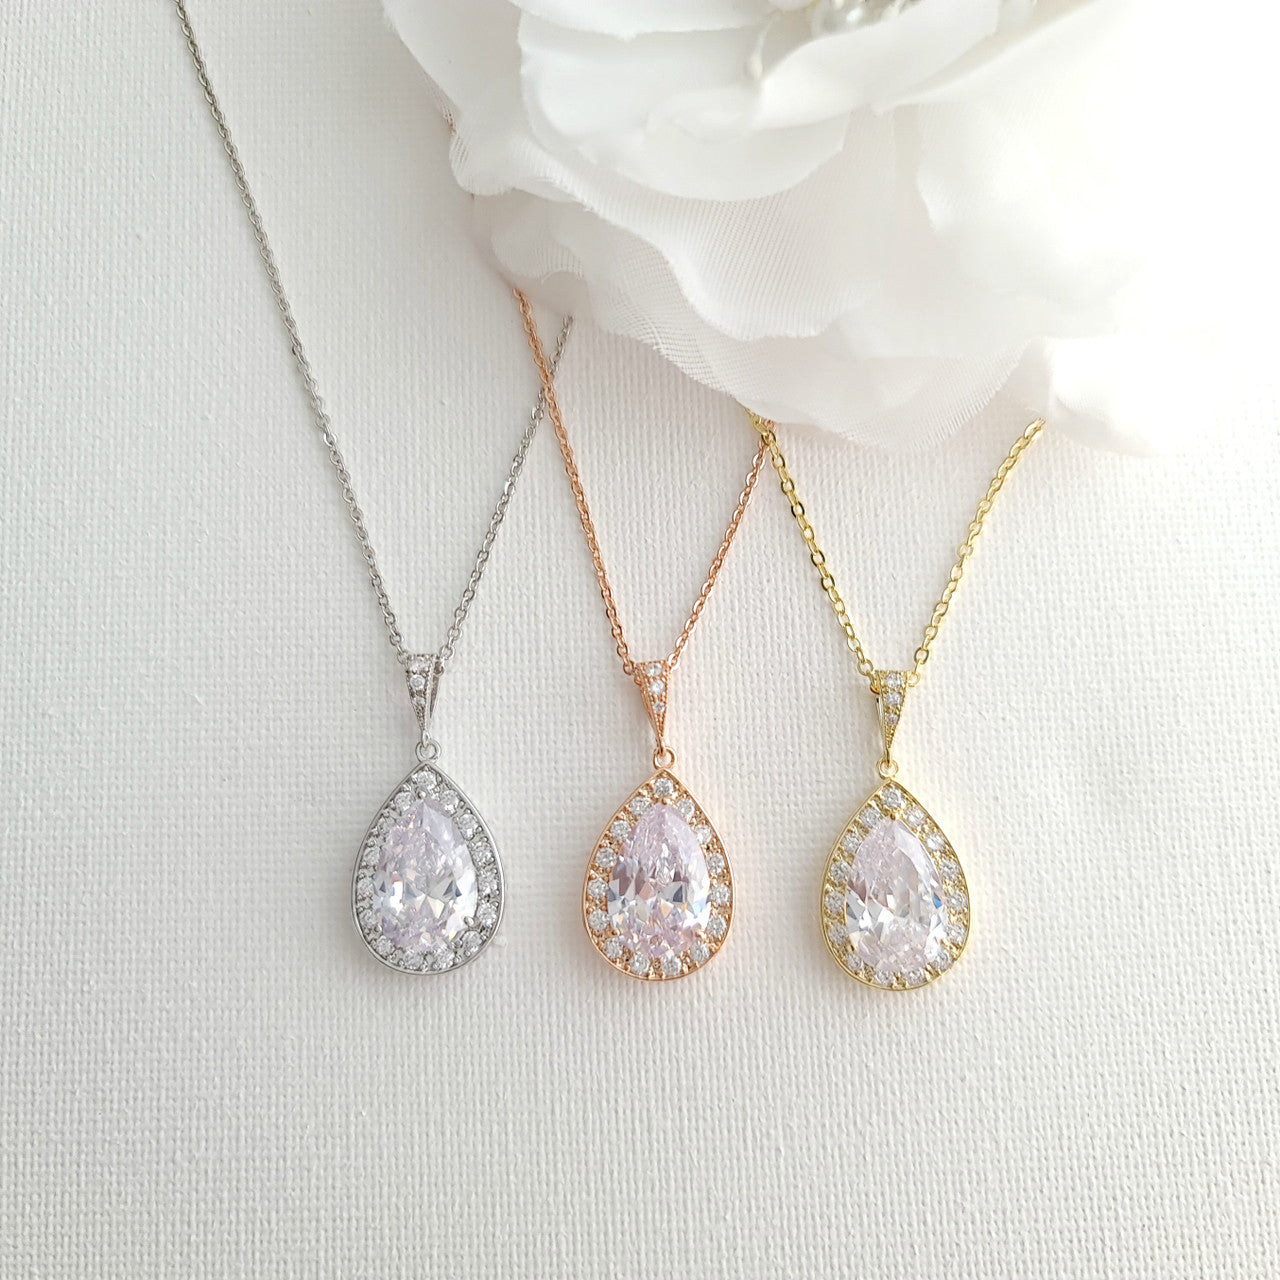 Teardrop Necklace in 14K Gold & Cubic Zirconia for Brides & Bridesmaids-Evelyn